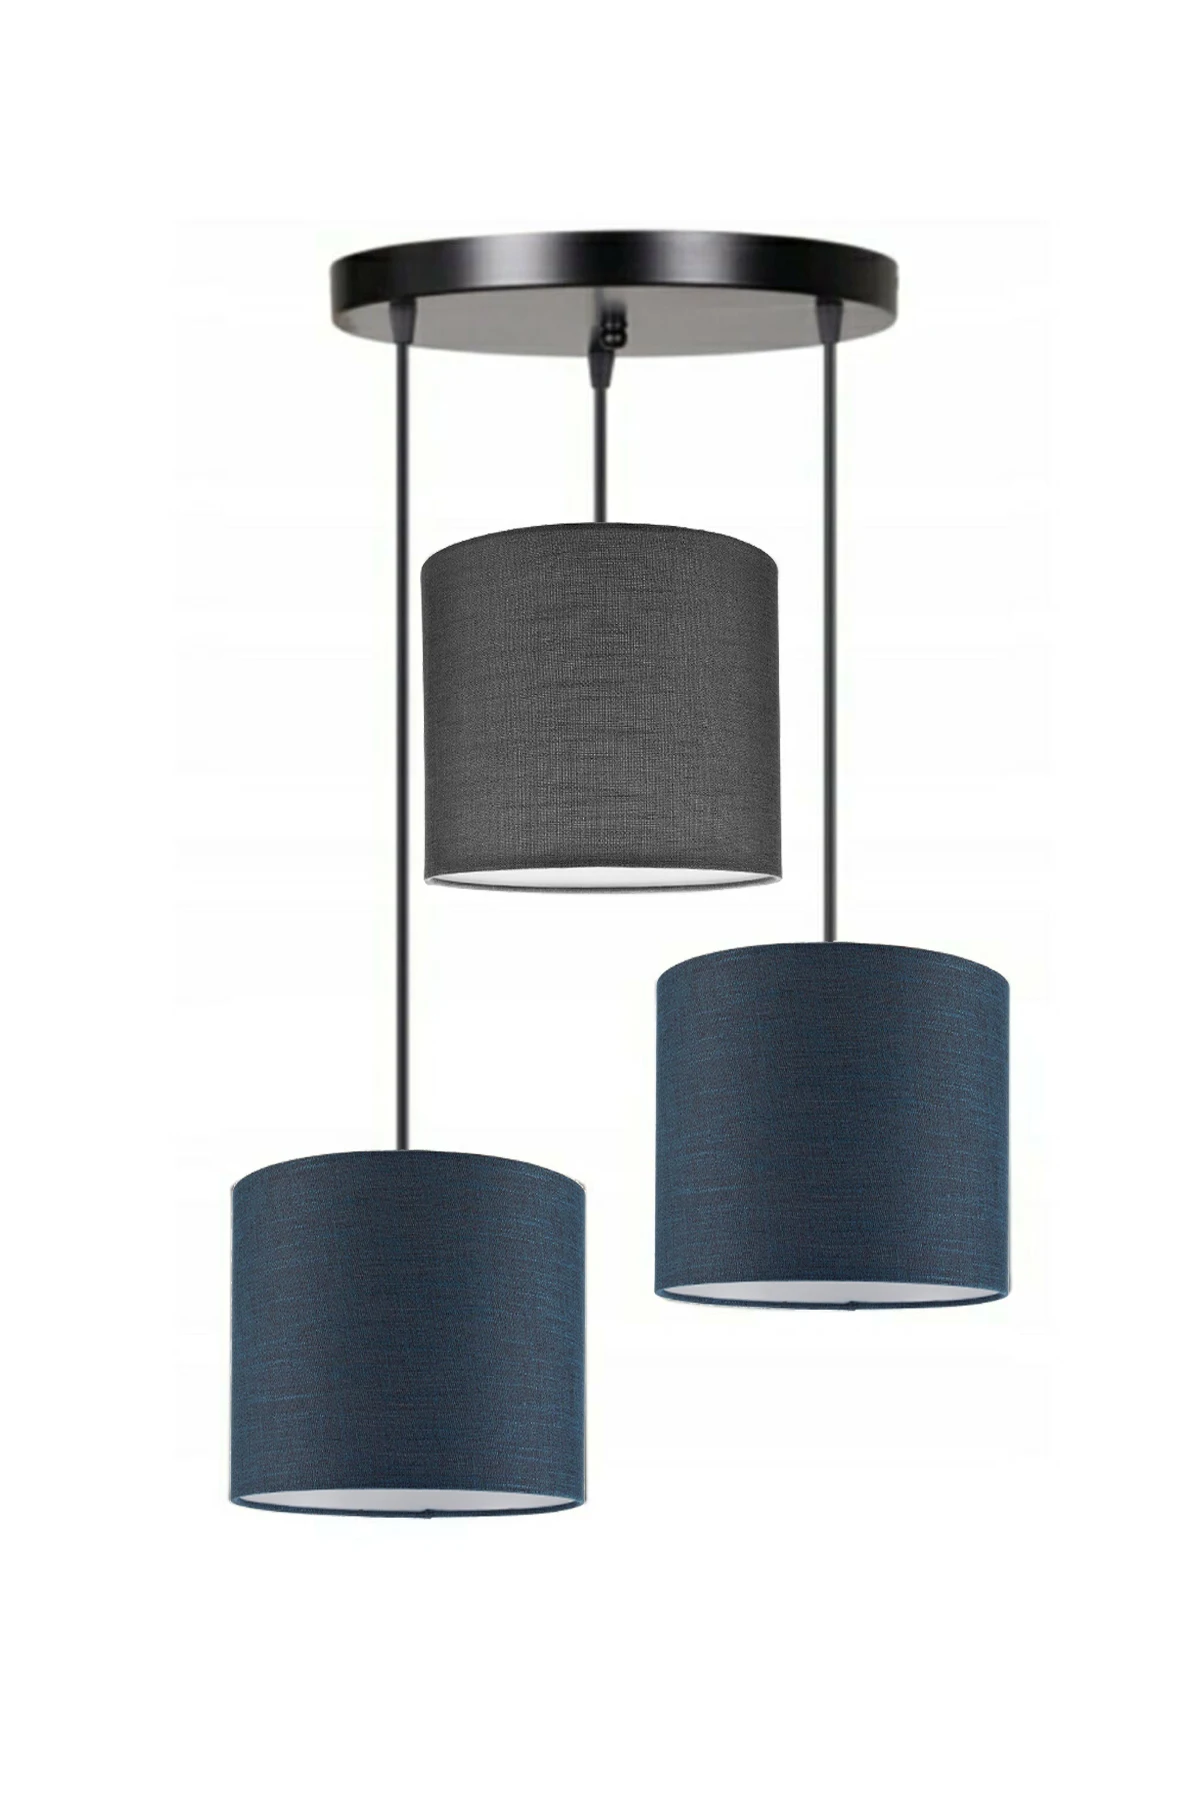 3 Heads 2 Navy Blue 1 Dark Gray Cylinder Fabric Lampshade Pendant Lamp Chandelier Modern Decorative Design For Home Hotel Office